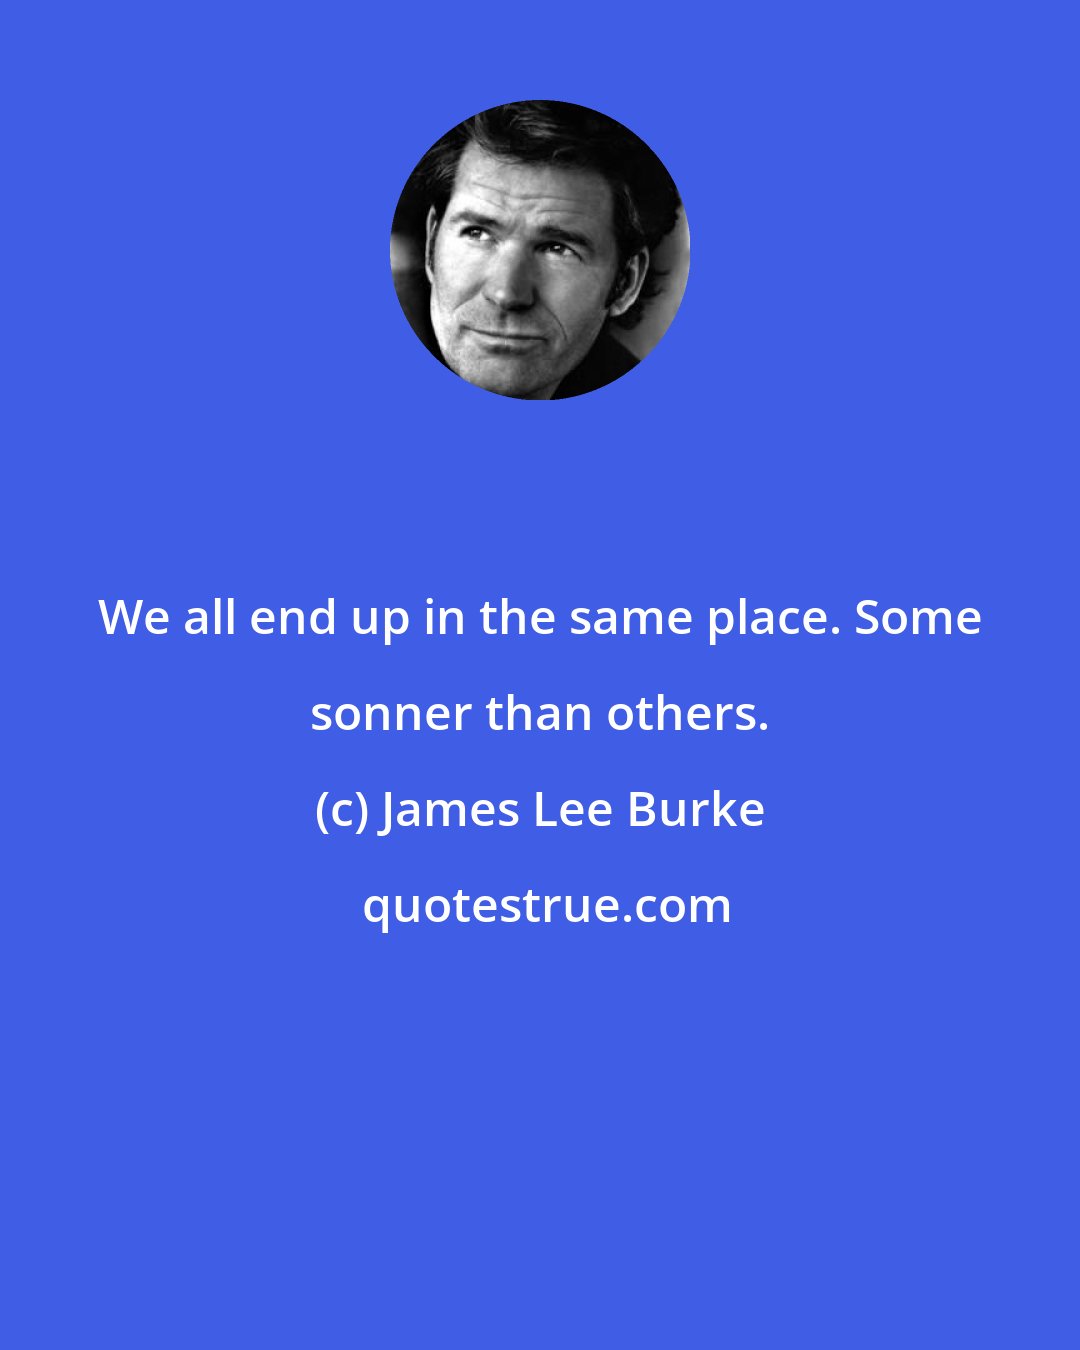 James Lee Burke: We all end up in the same place. Some sonner than others.